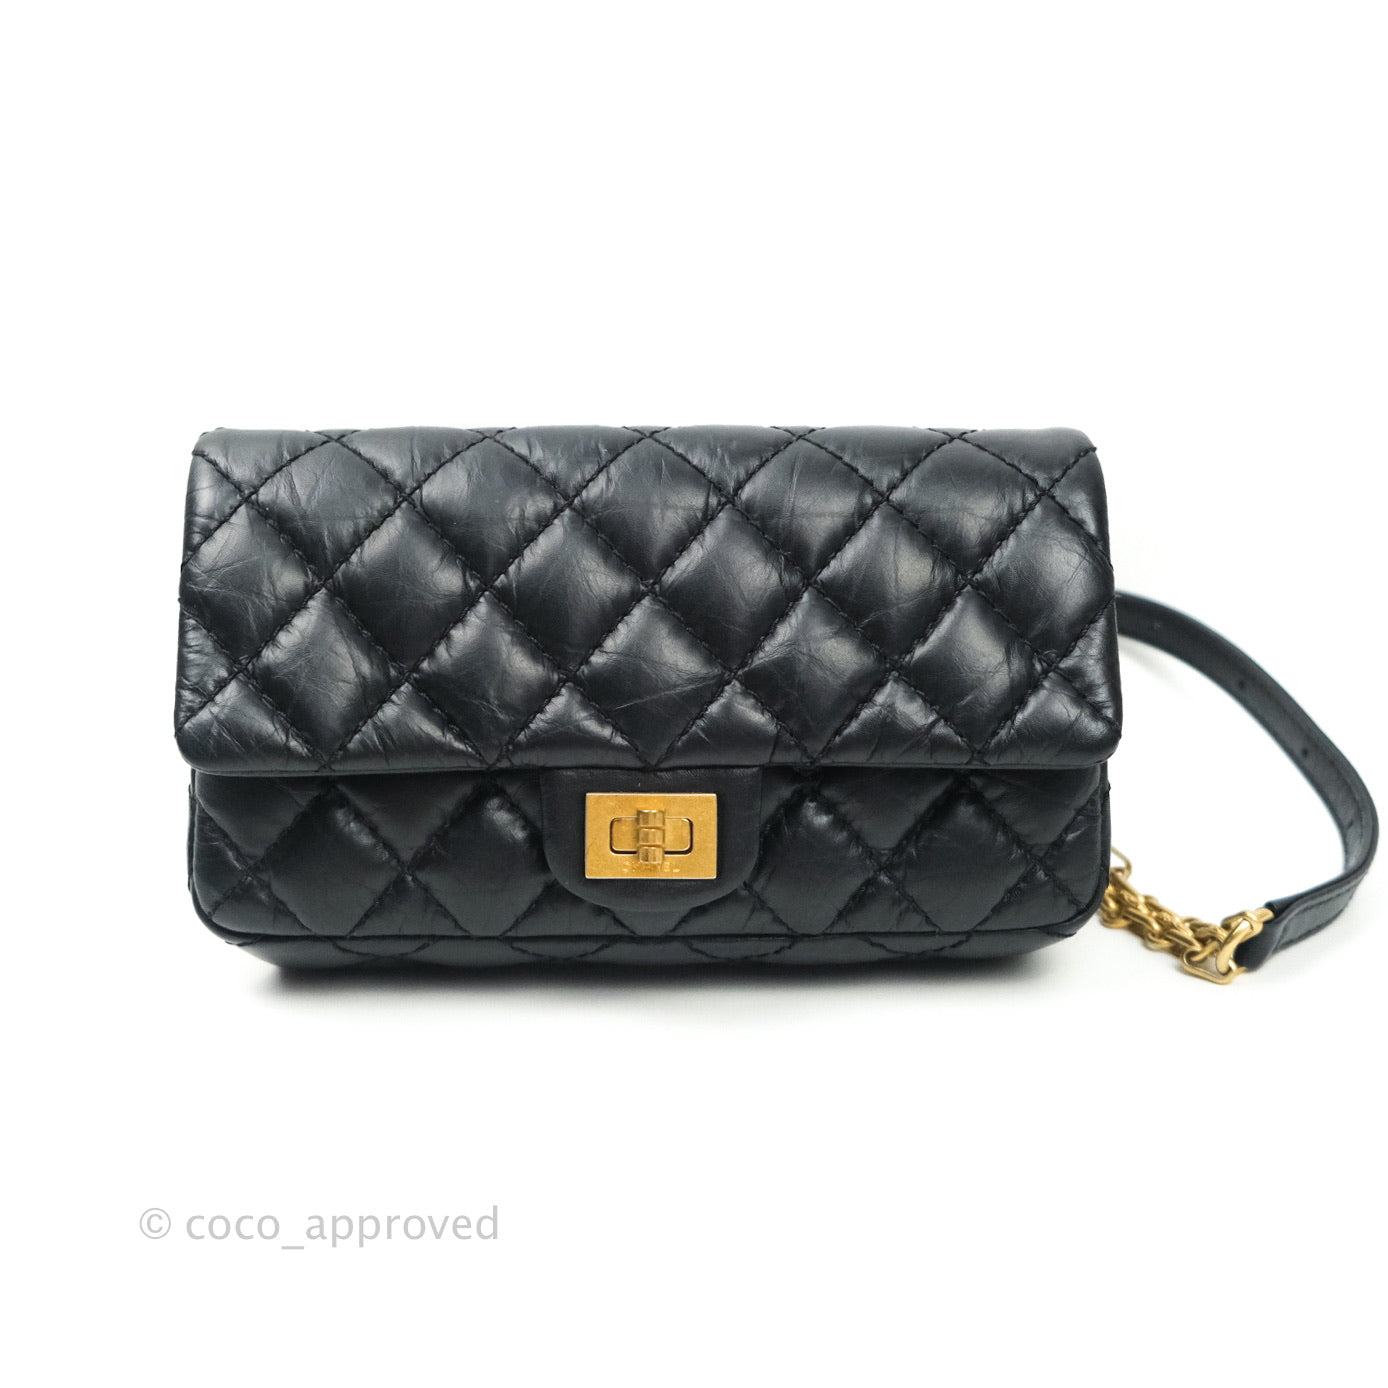 Chanel Reissue Quilted Leather Fannypack Bumbag Shoulder Bag